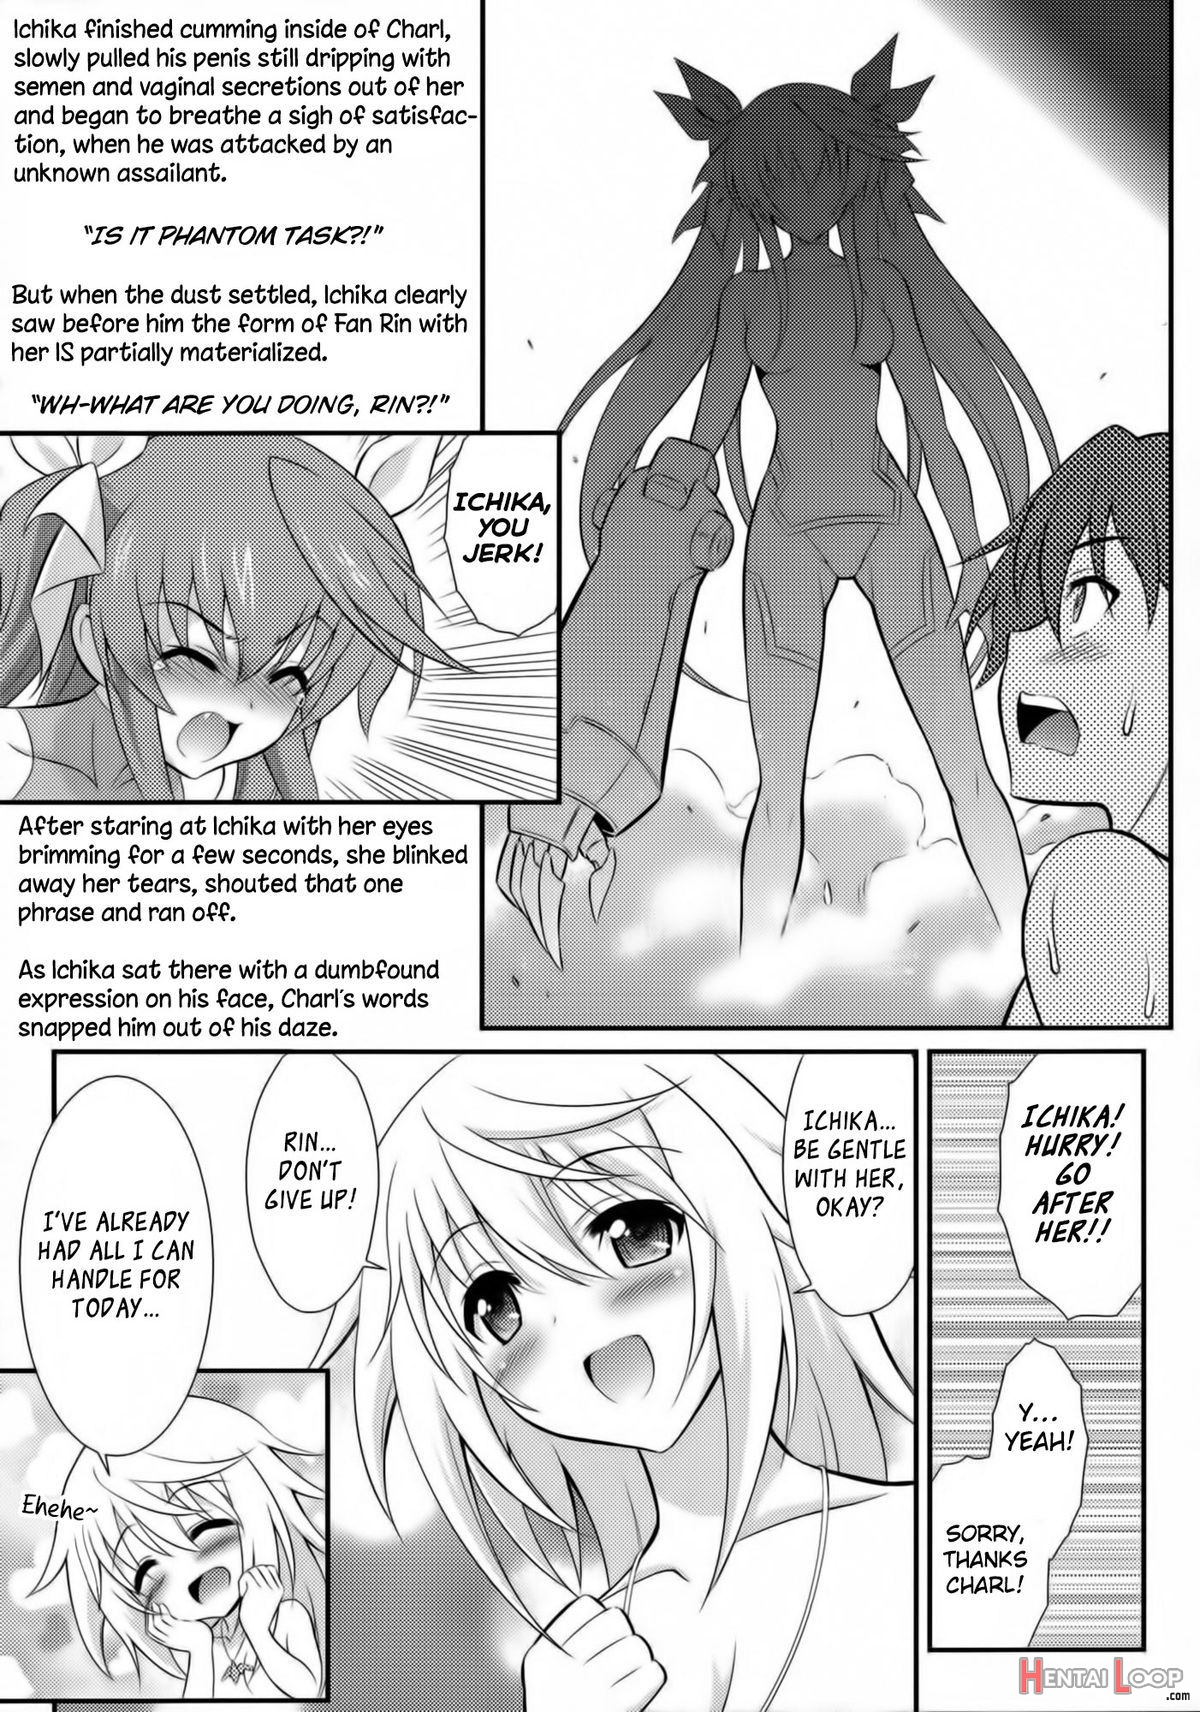 The Second Childhood Friend Has Small, Sensitive Breasts! page 7